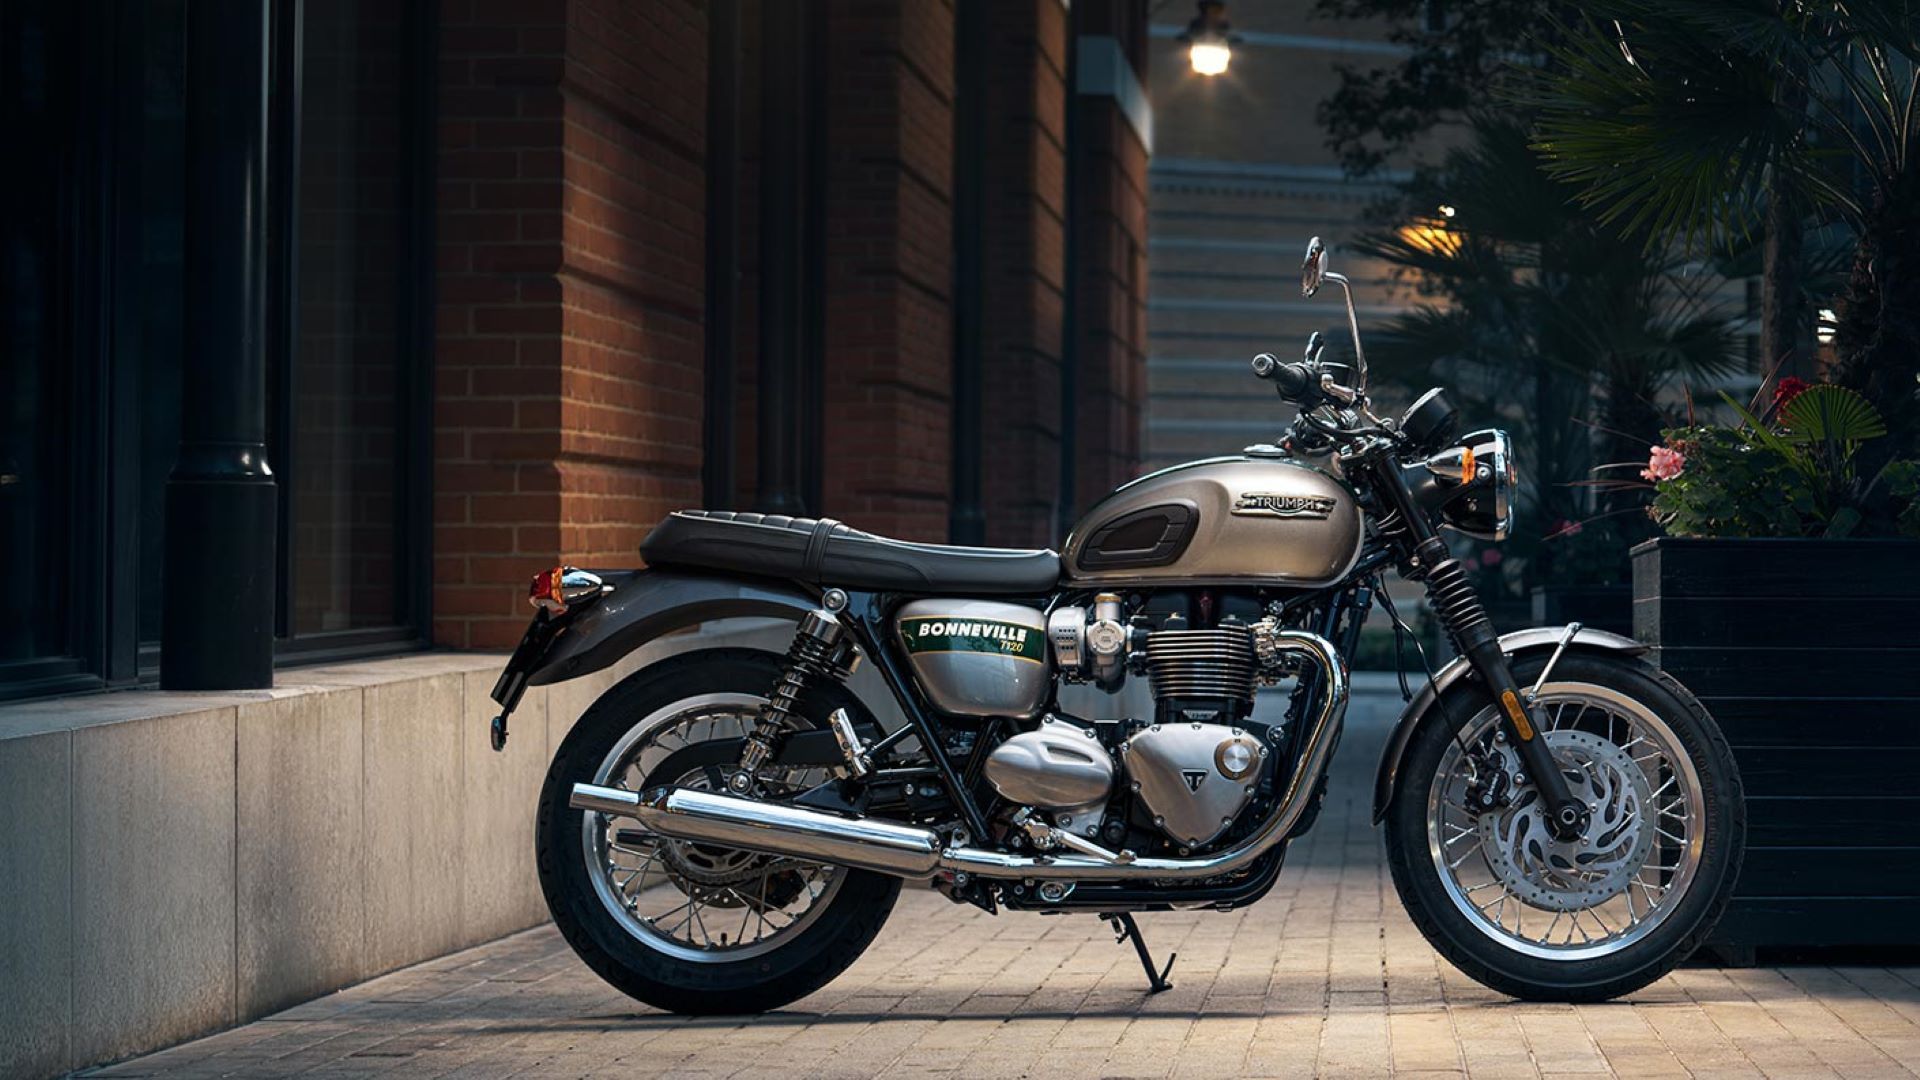 Triumph Bonneville T120: A Blend Of Power, Style, And Thrill